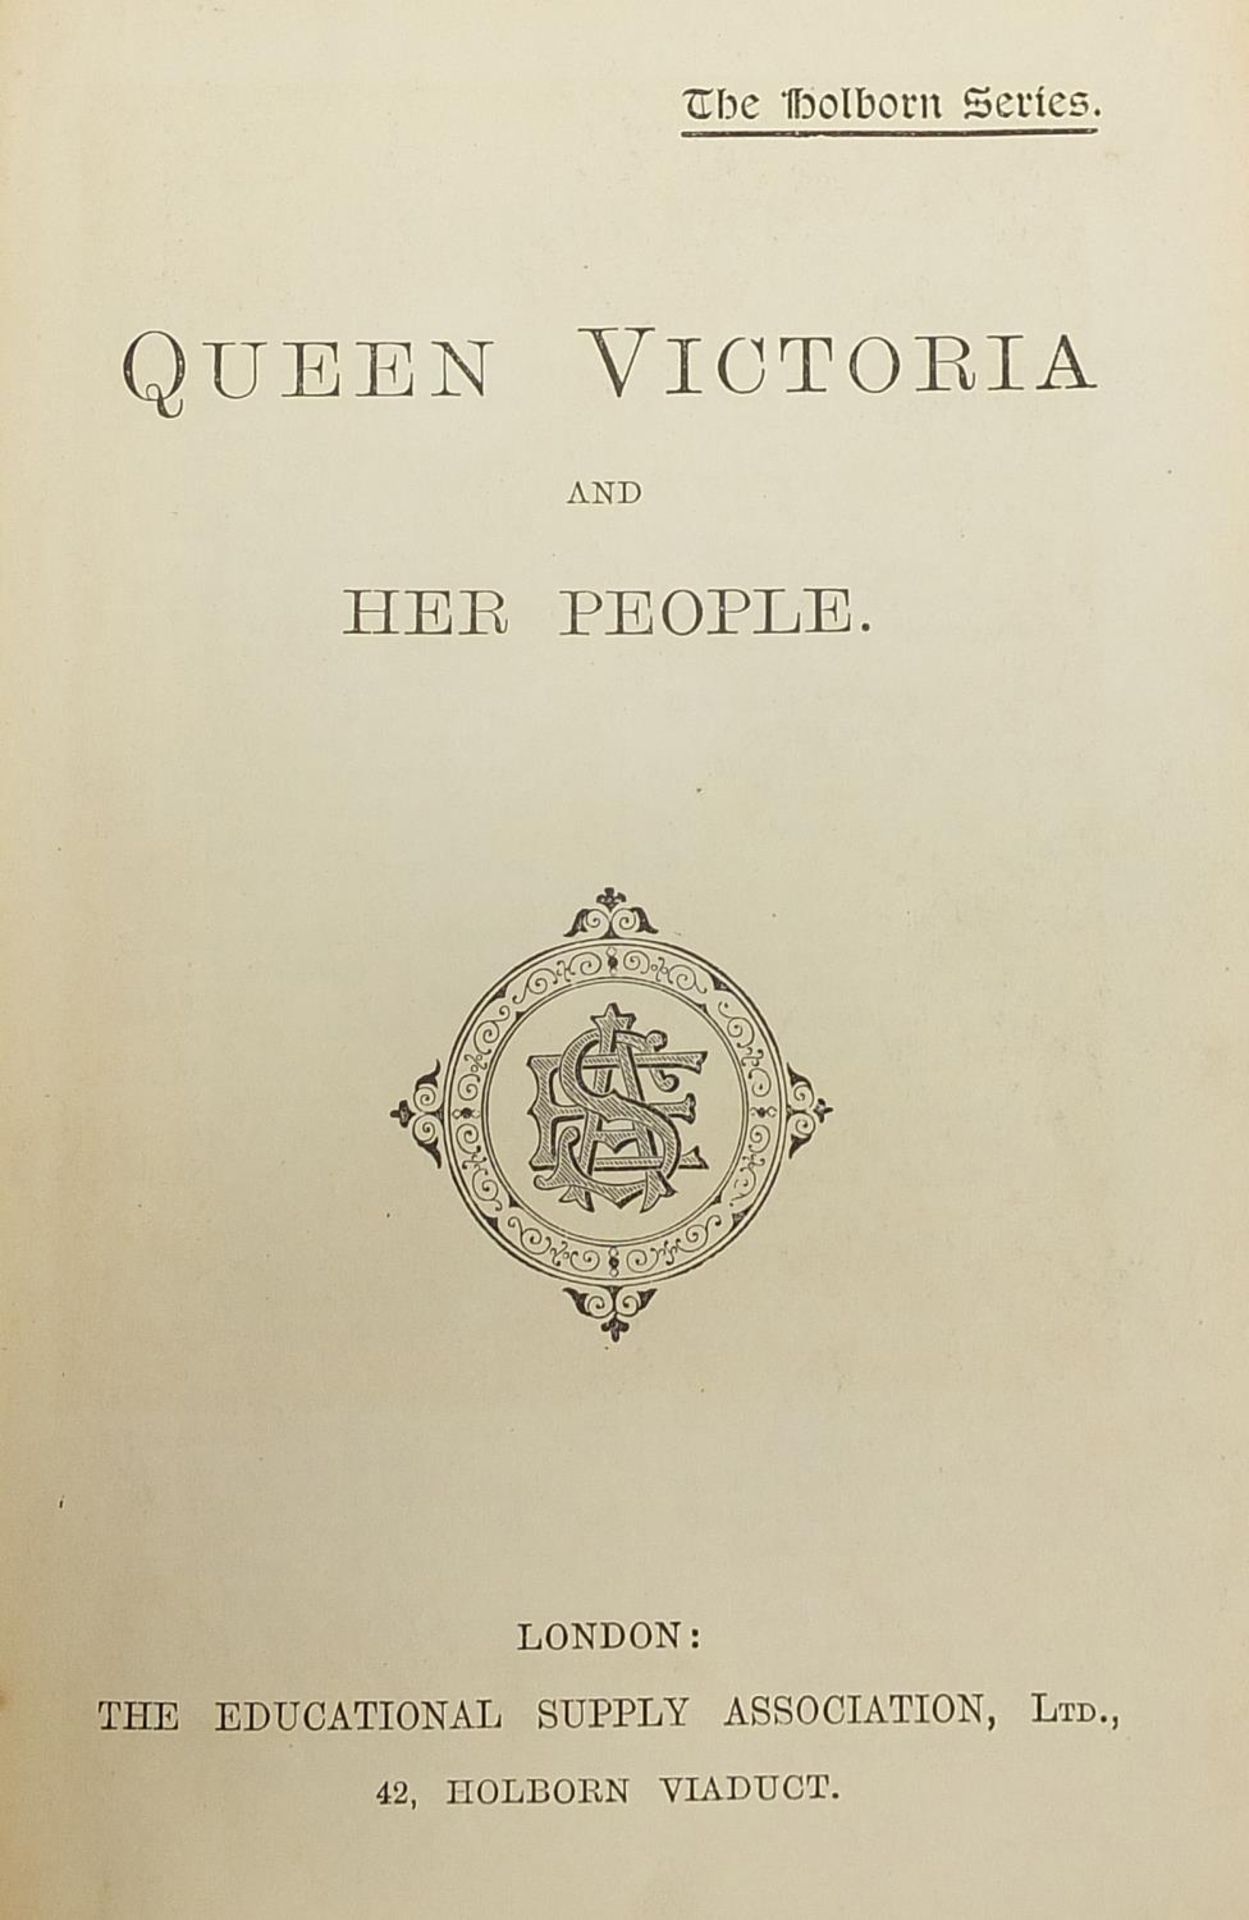 Two hardback books comprising Queen Victoria and her People and Mrs Beeton's Everyday Cooking and - Image 3 of 4